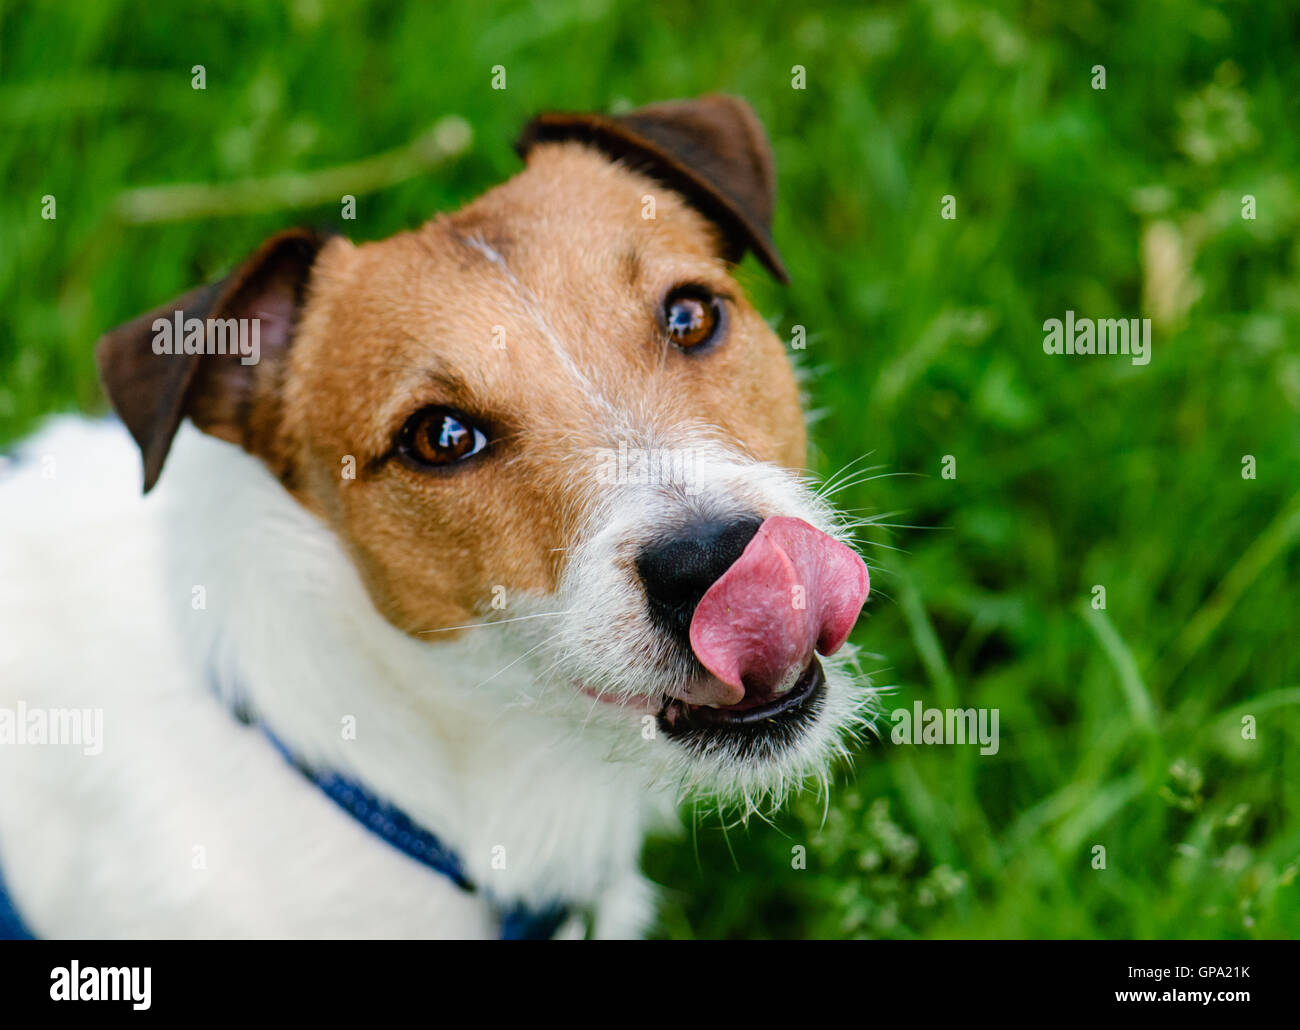 So delicious: dog looking into camera, licking and begging for treat Stock Photo